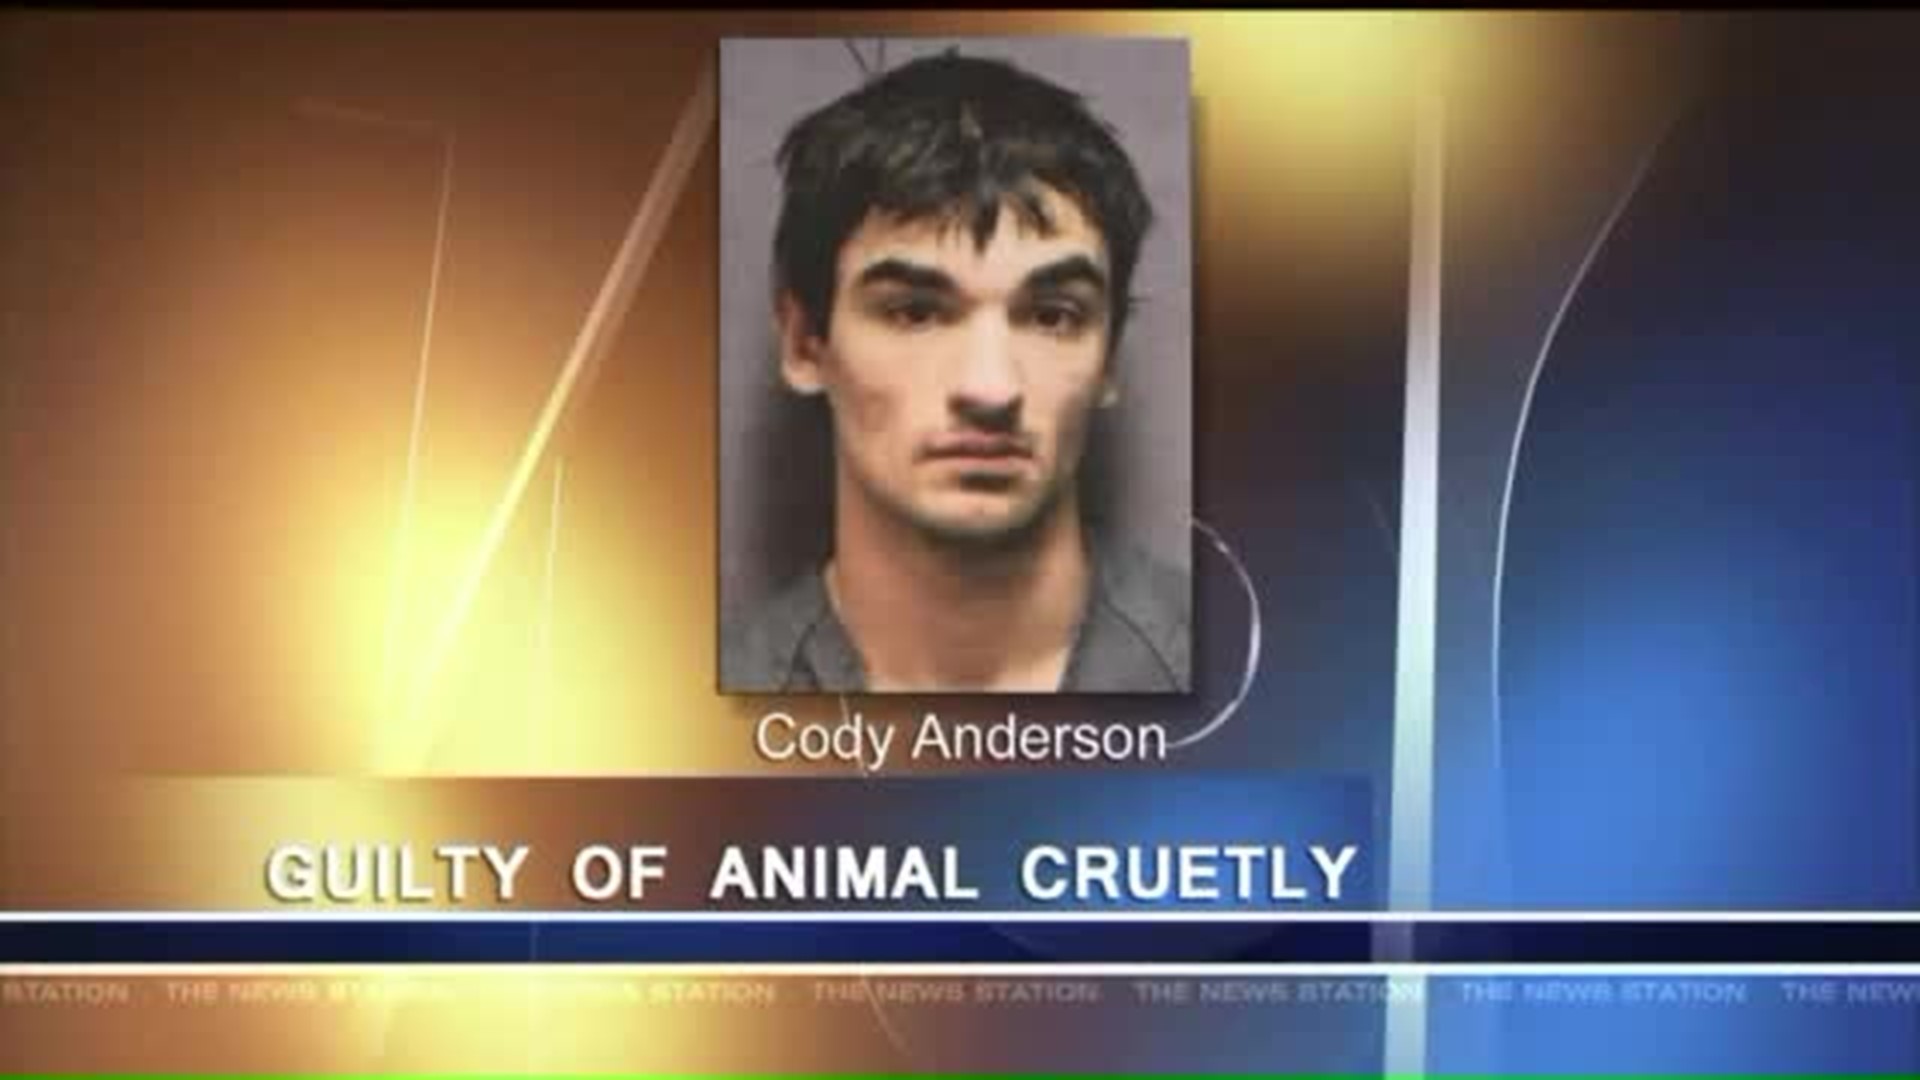 Man Who Killed Dogs Sentenced to Jail